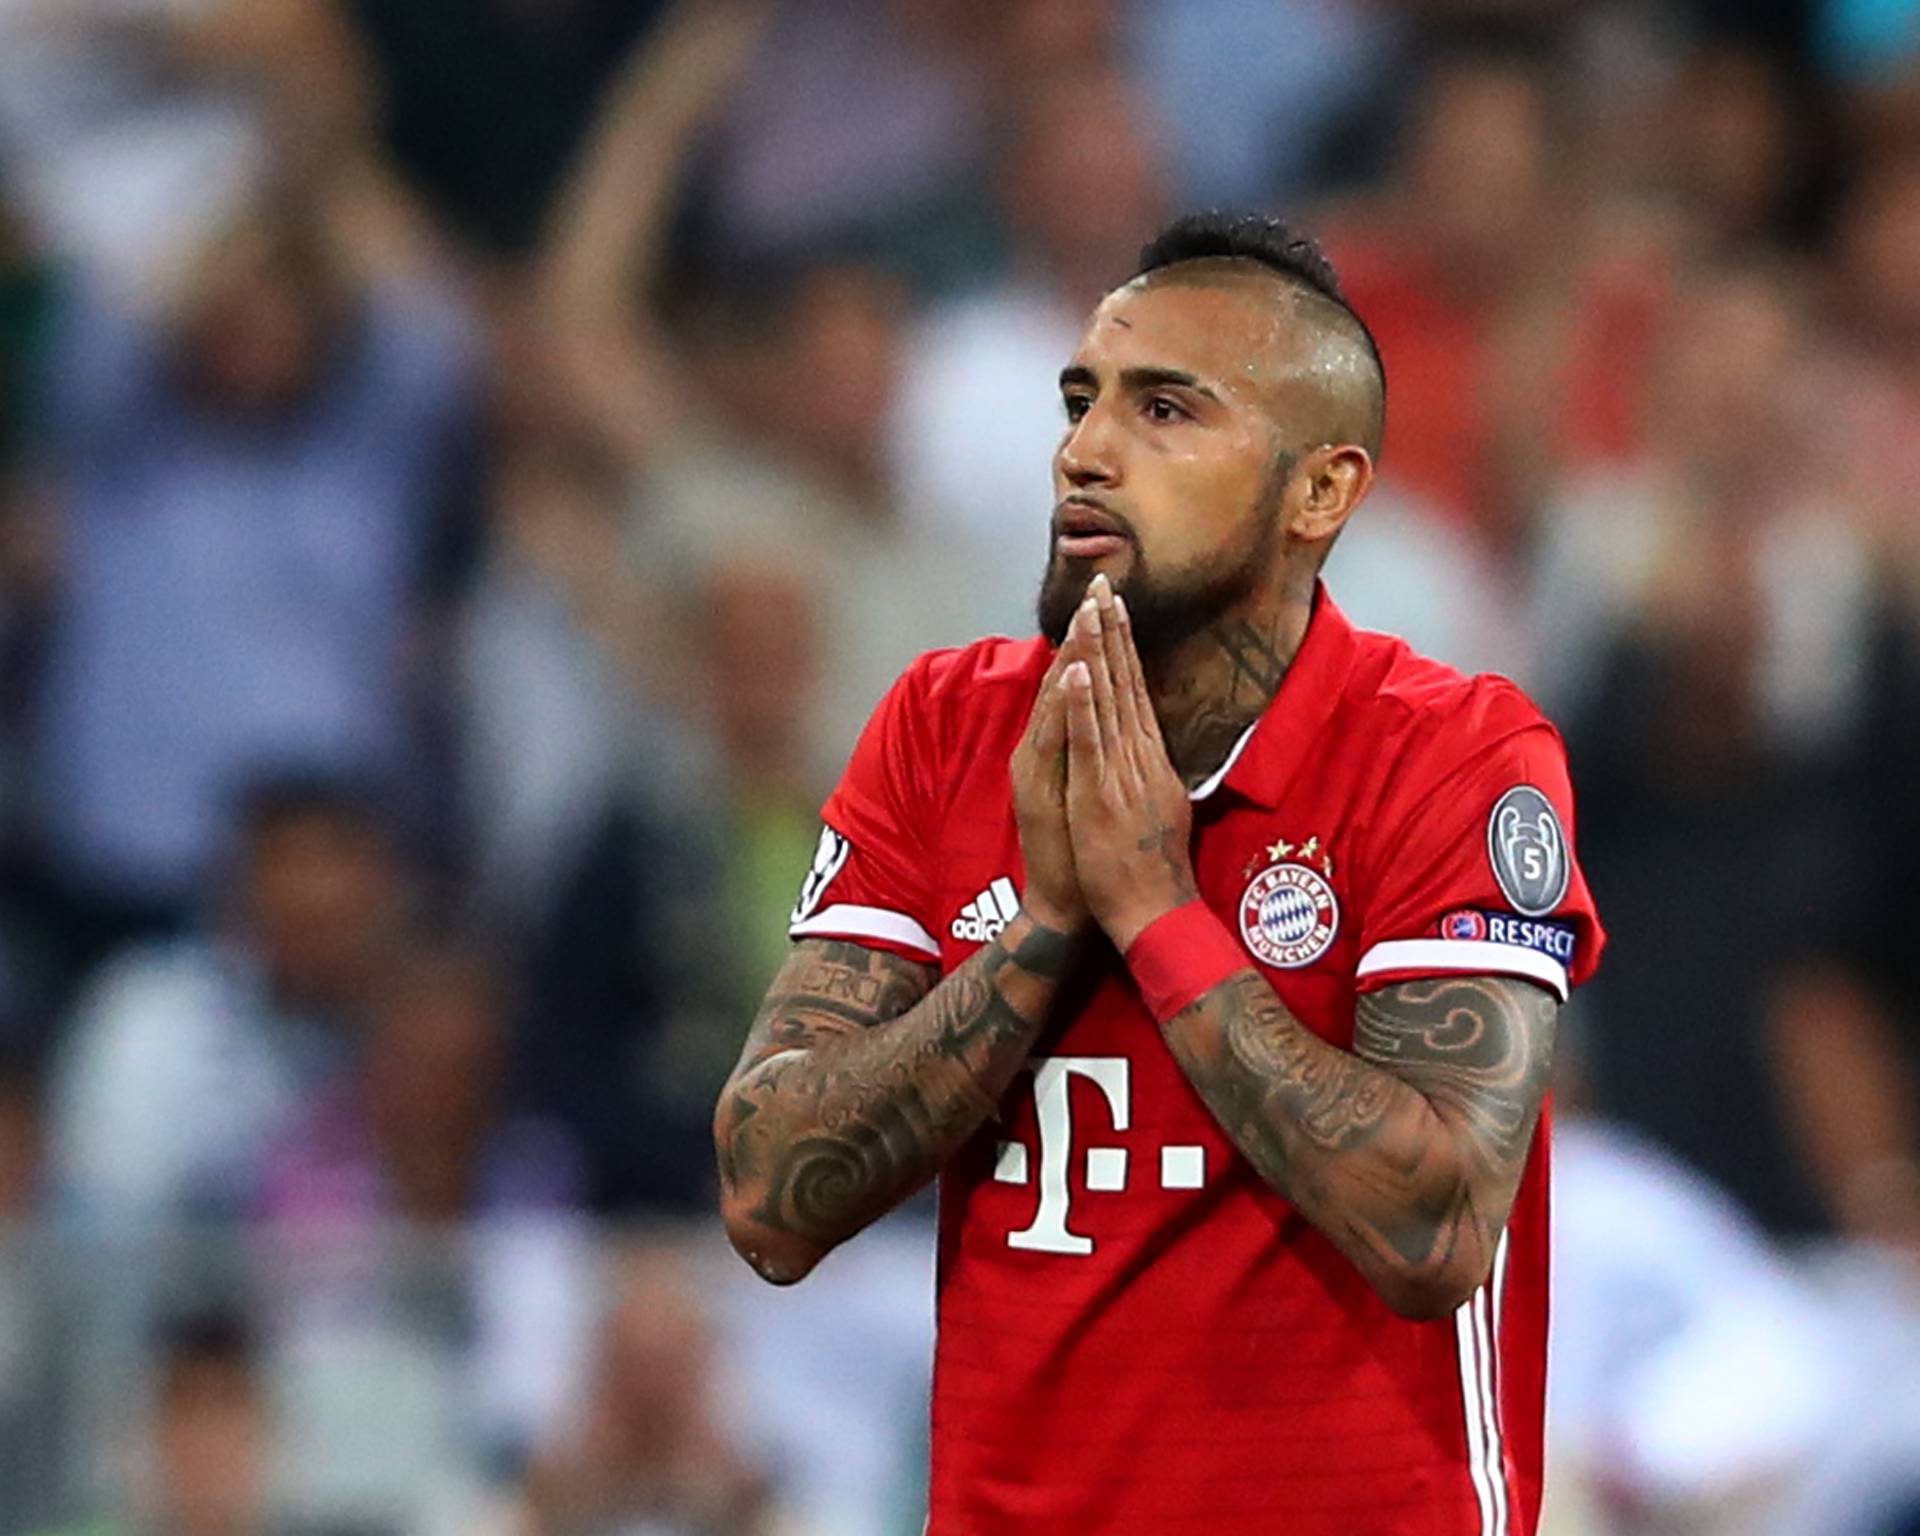 Bayern Munich's Arturo Vidal looks dejected after being sent off